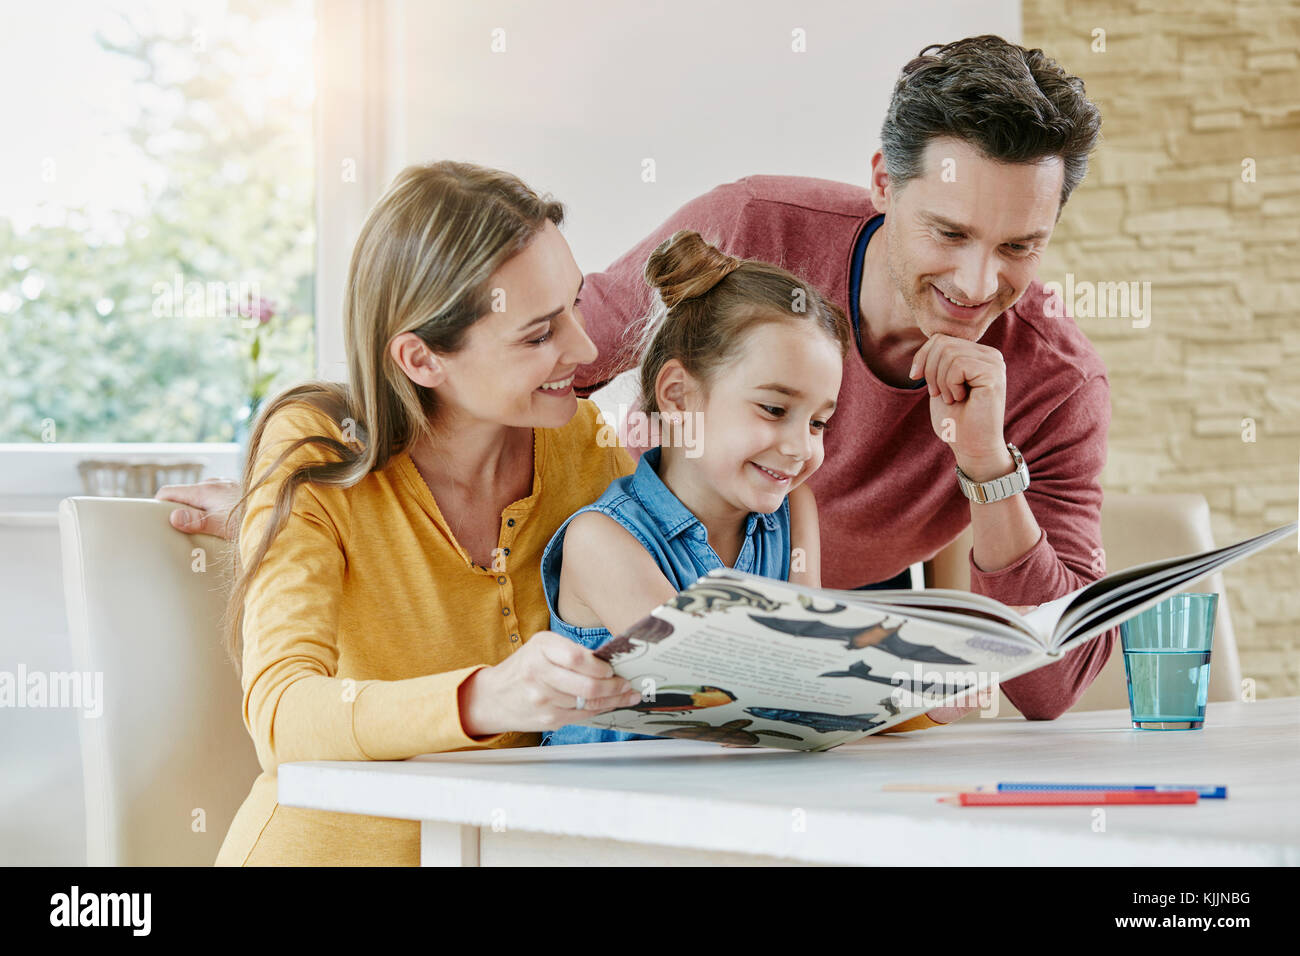 Happy family at home looking at picture book Stock Photo